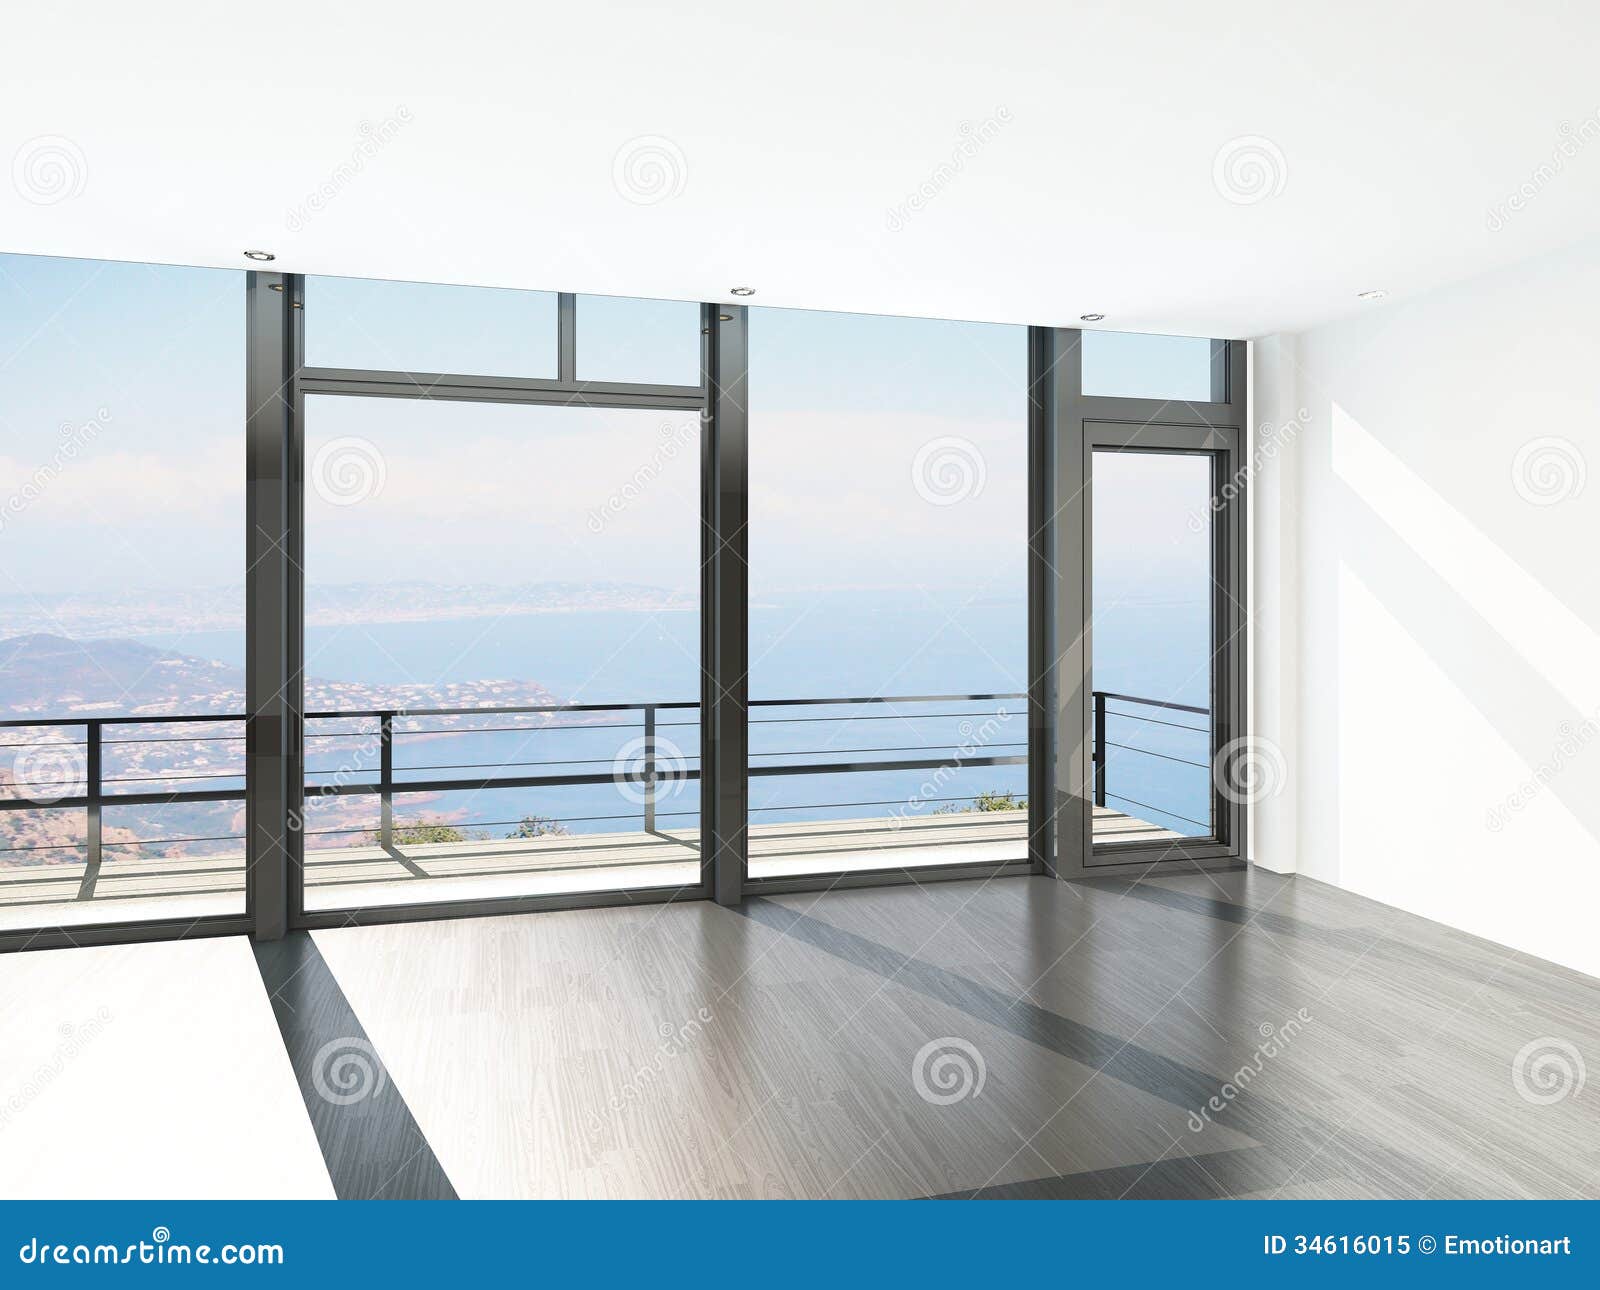 Empty Room Interior With Floor To Ceiling Windows And Scenic View